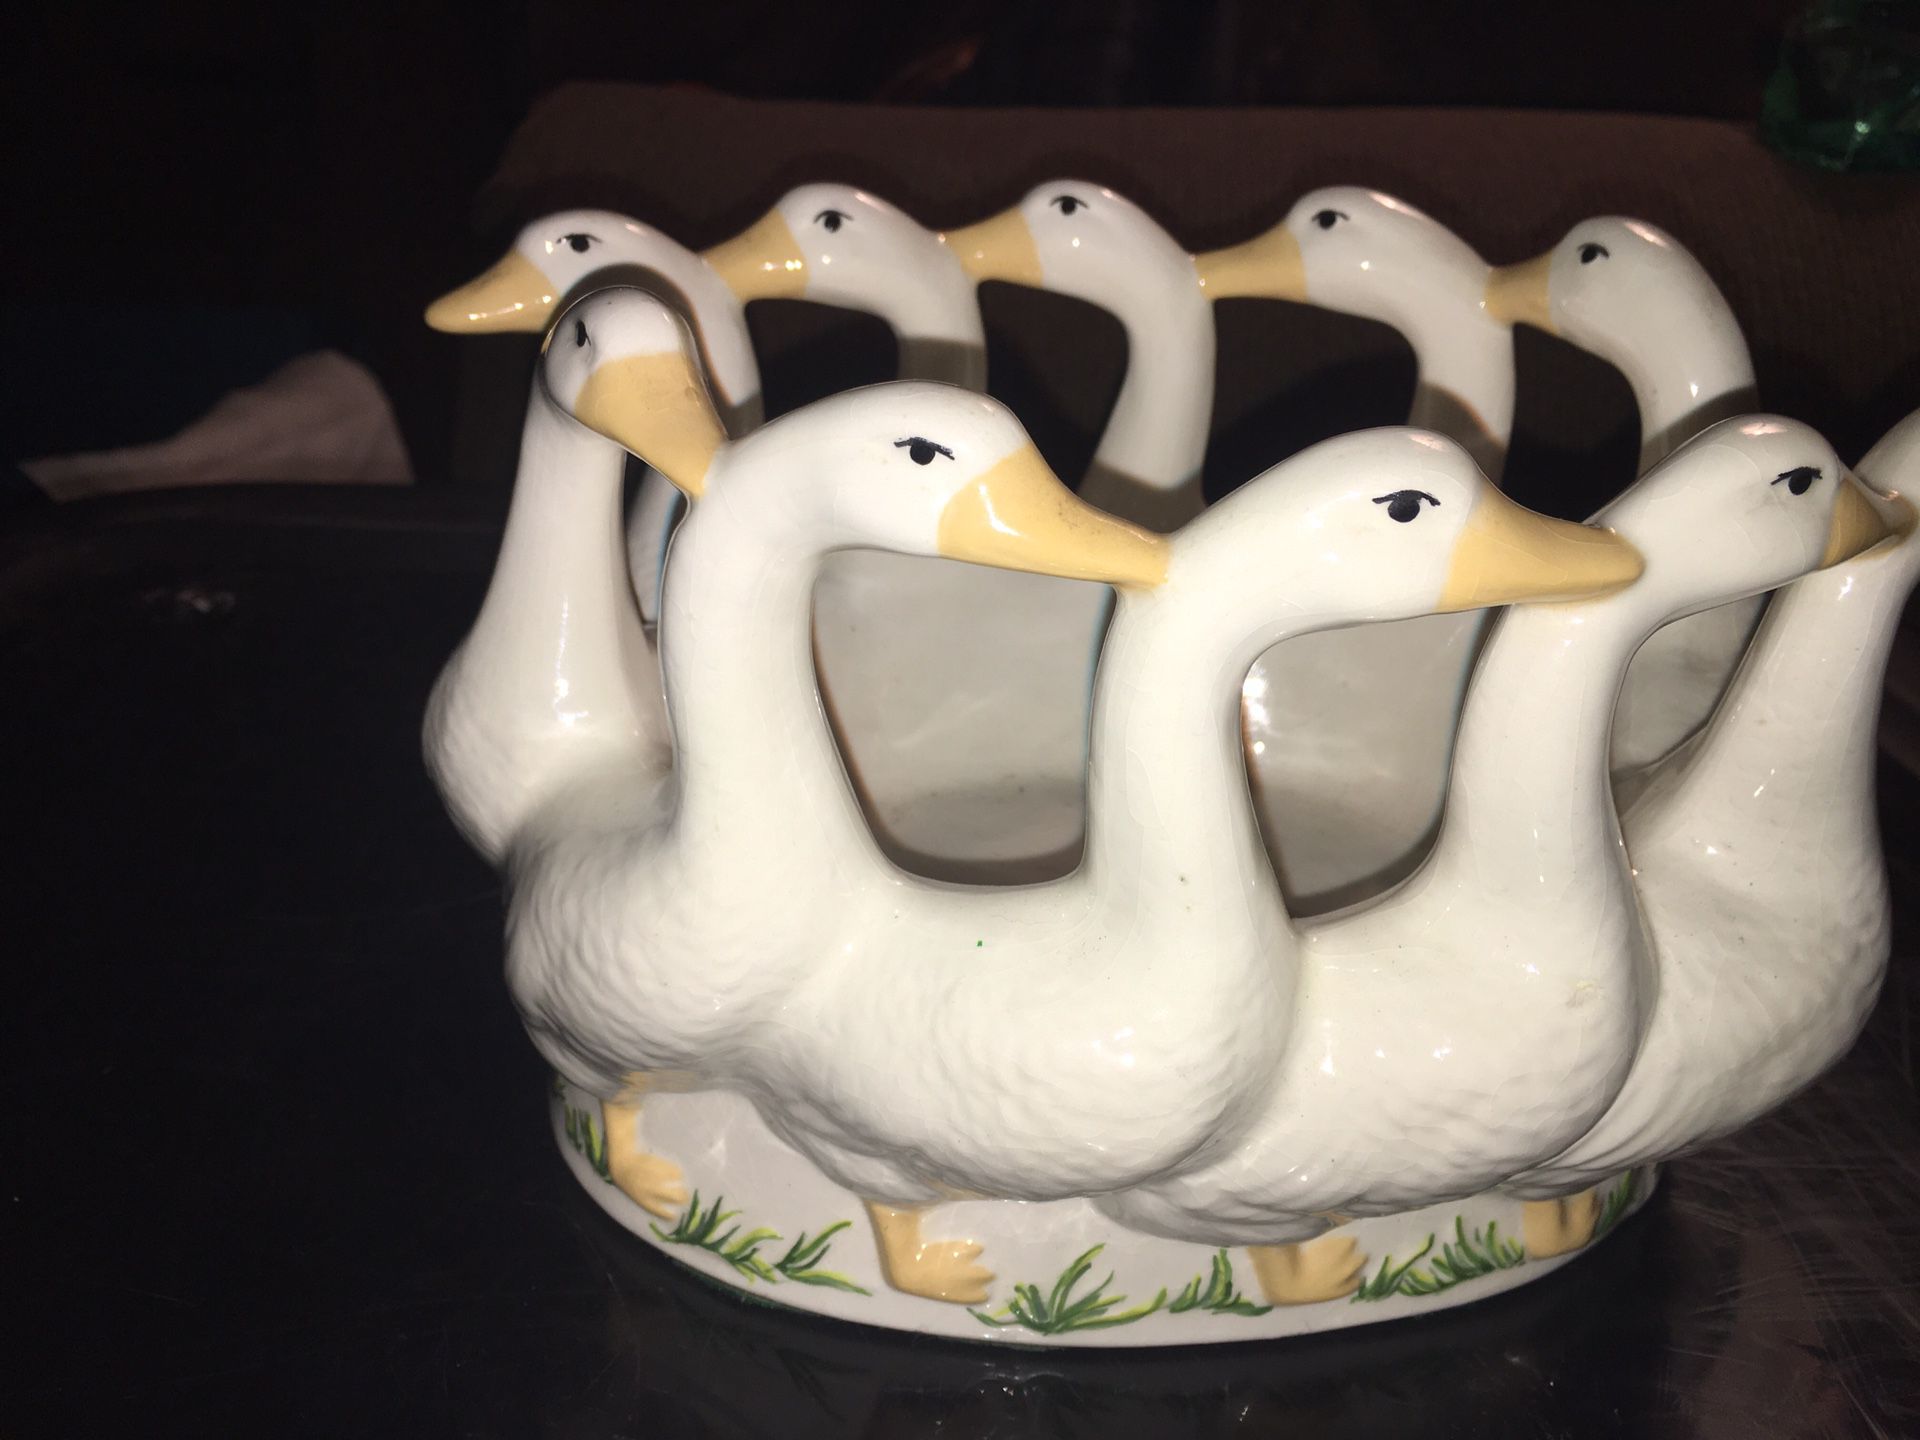 Holland mold ceramic lusterware gaggle of geese centerpiece or candle holder